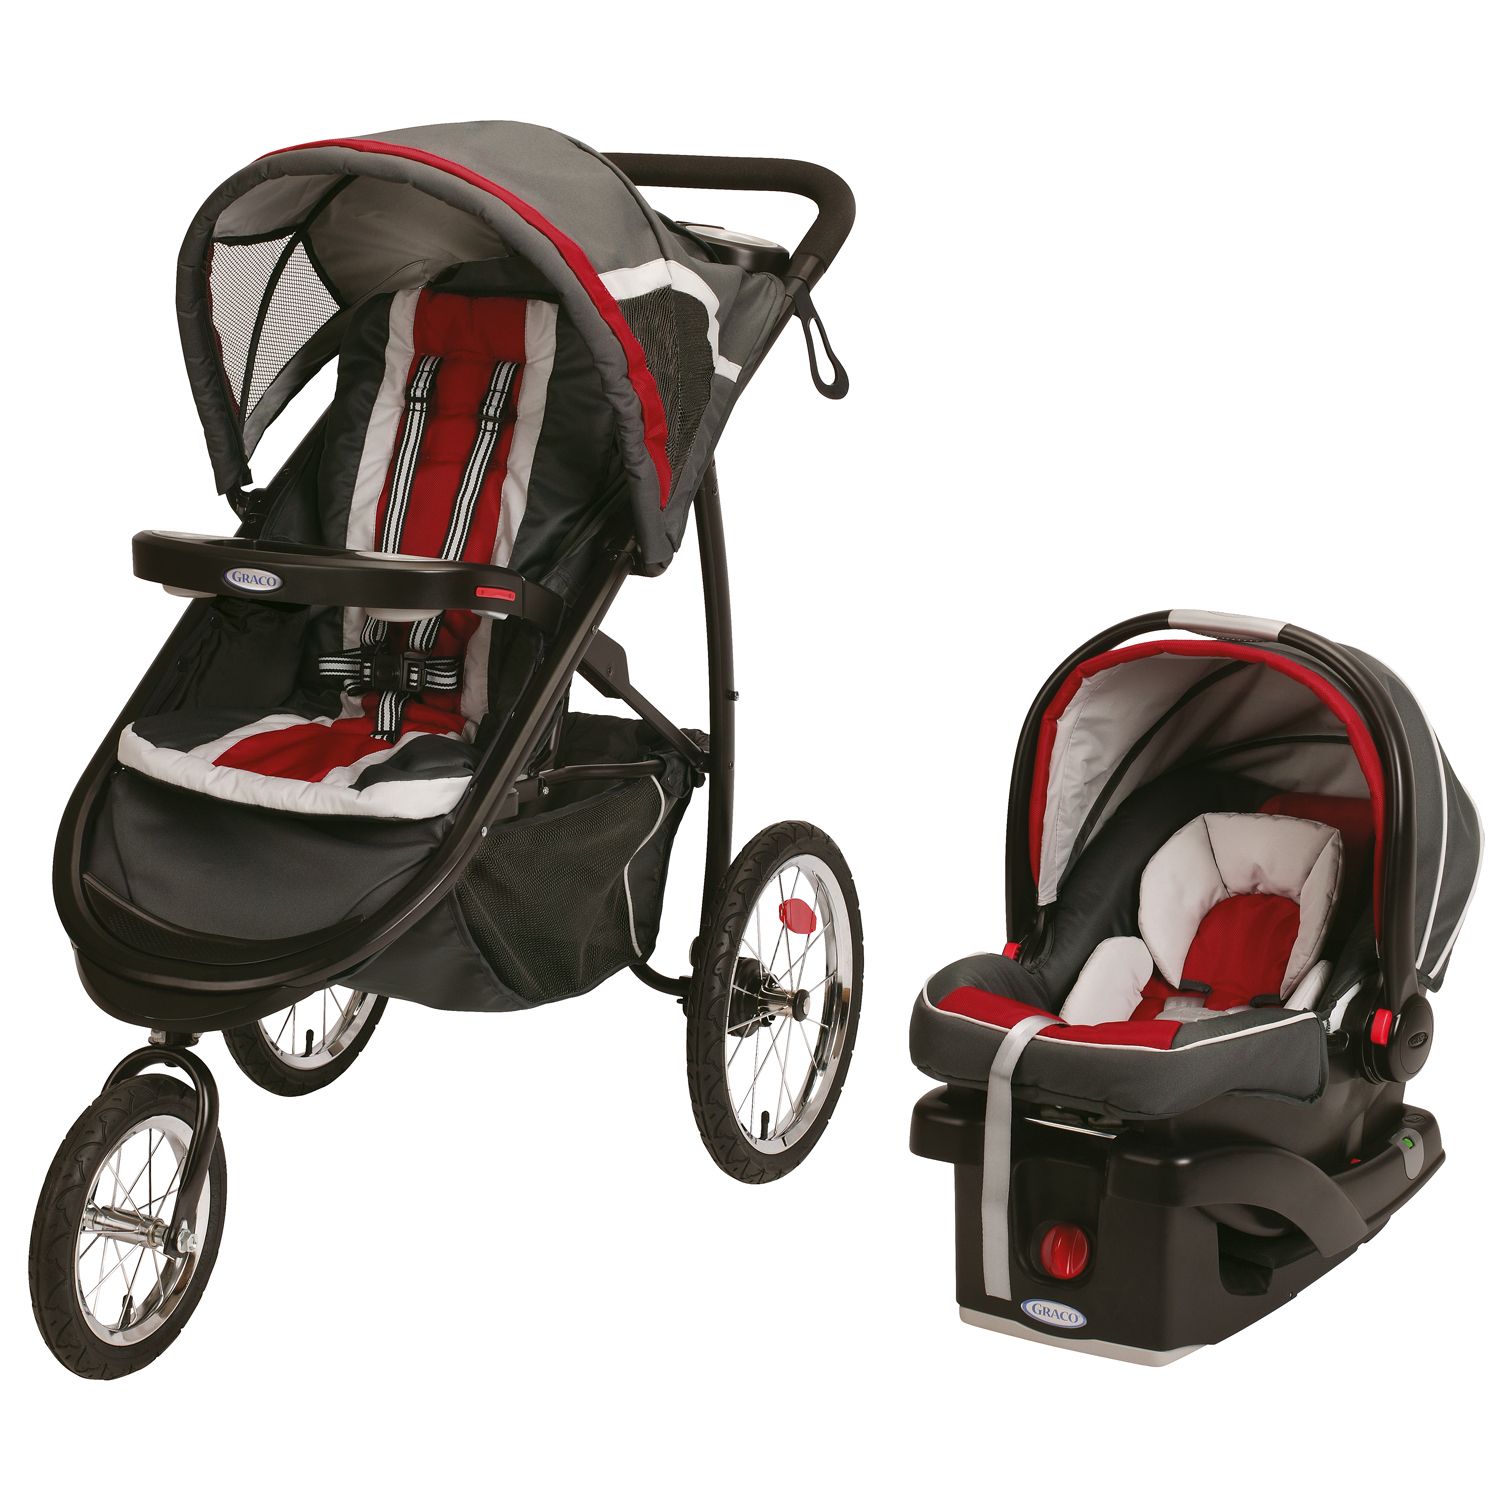 graco fitfold jogger travel system